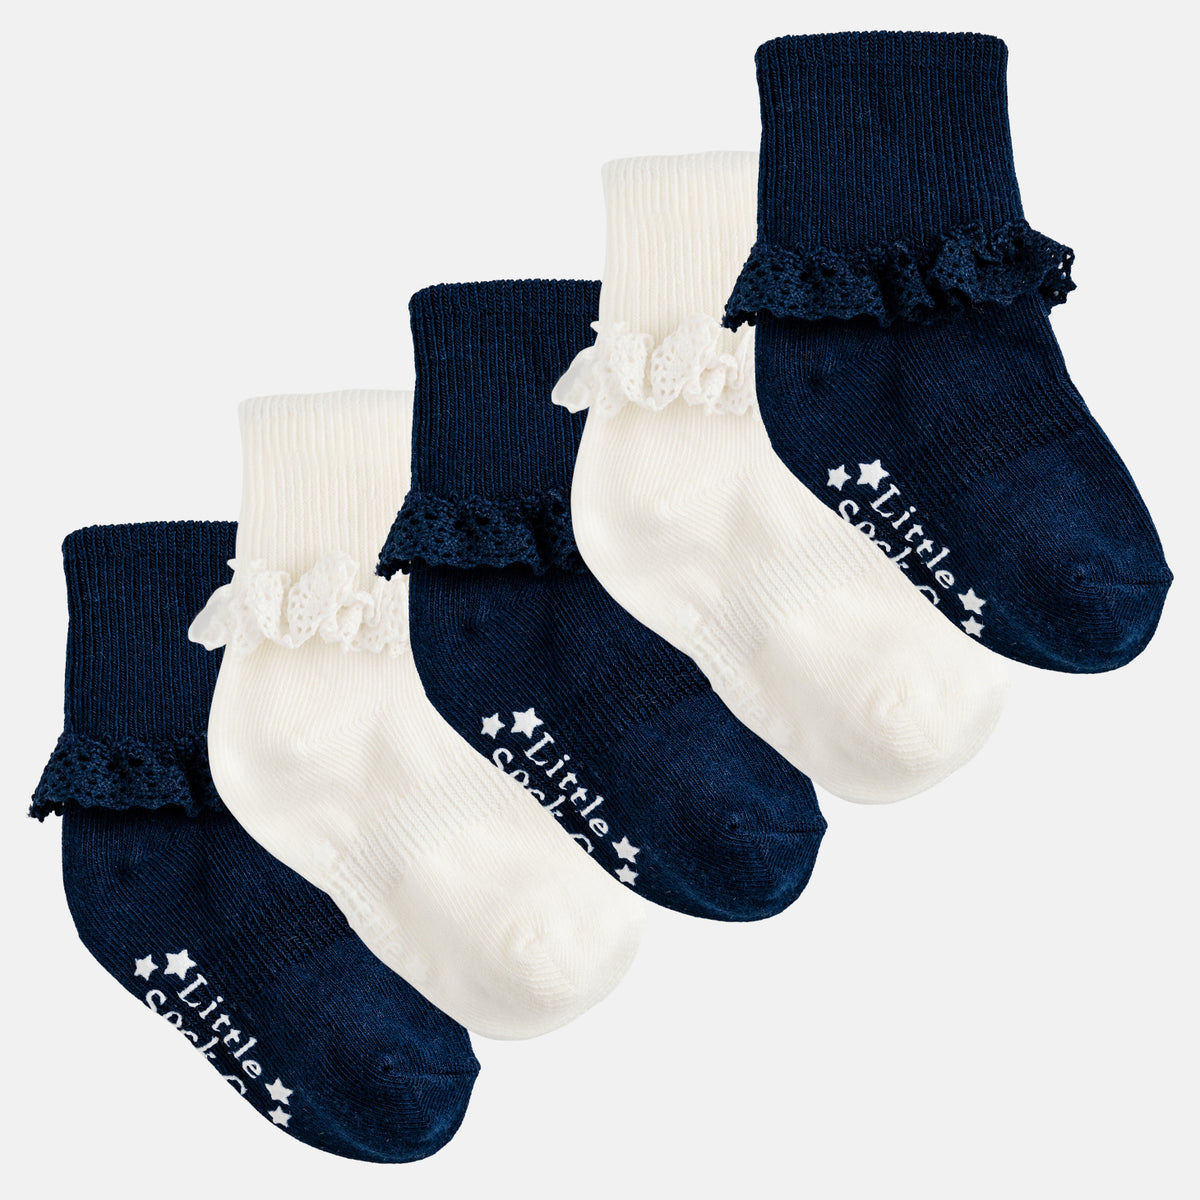 Frilly Non-Slip Stay-on Baby and Toddler Socks - 5 Pack in Navy and Pearl White